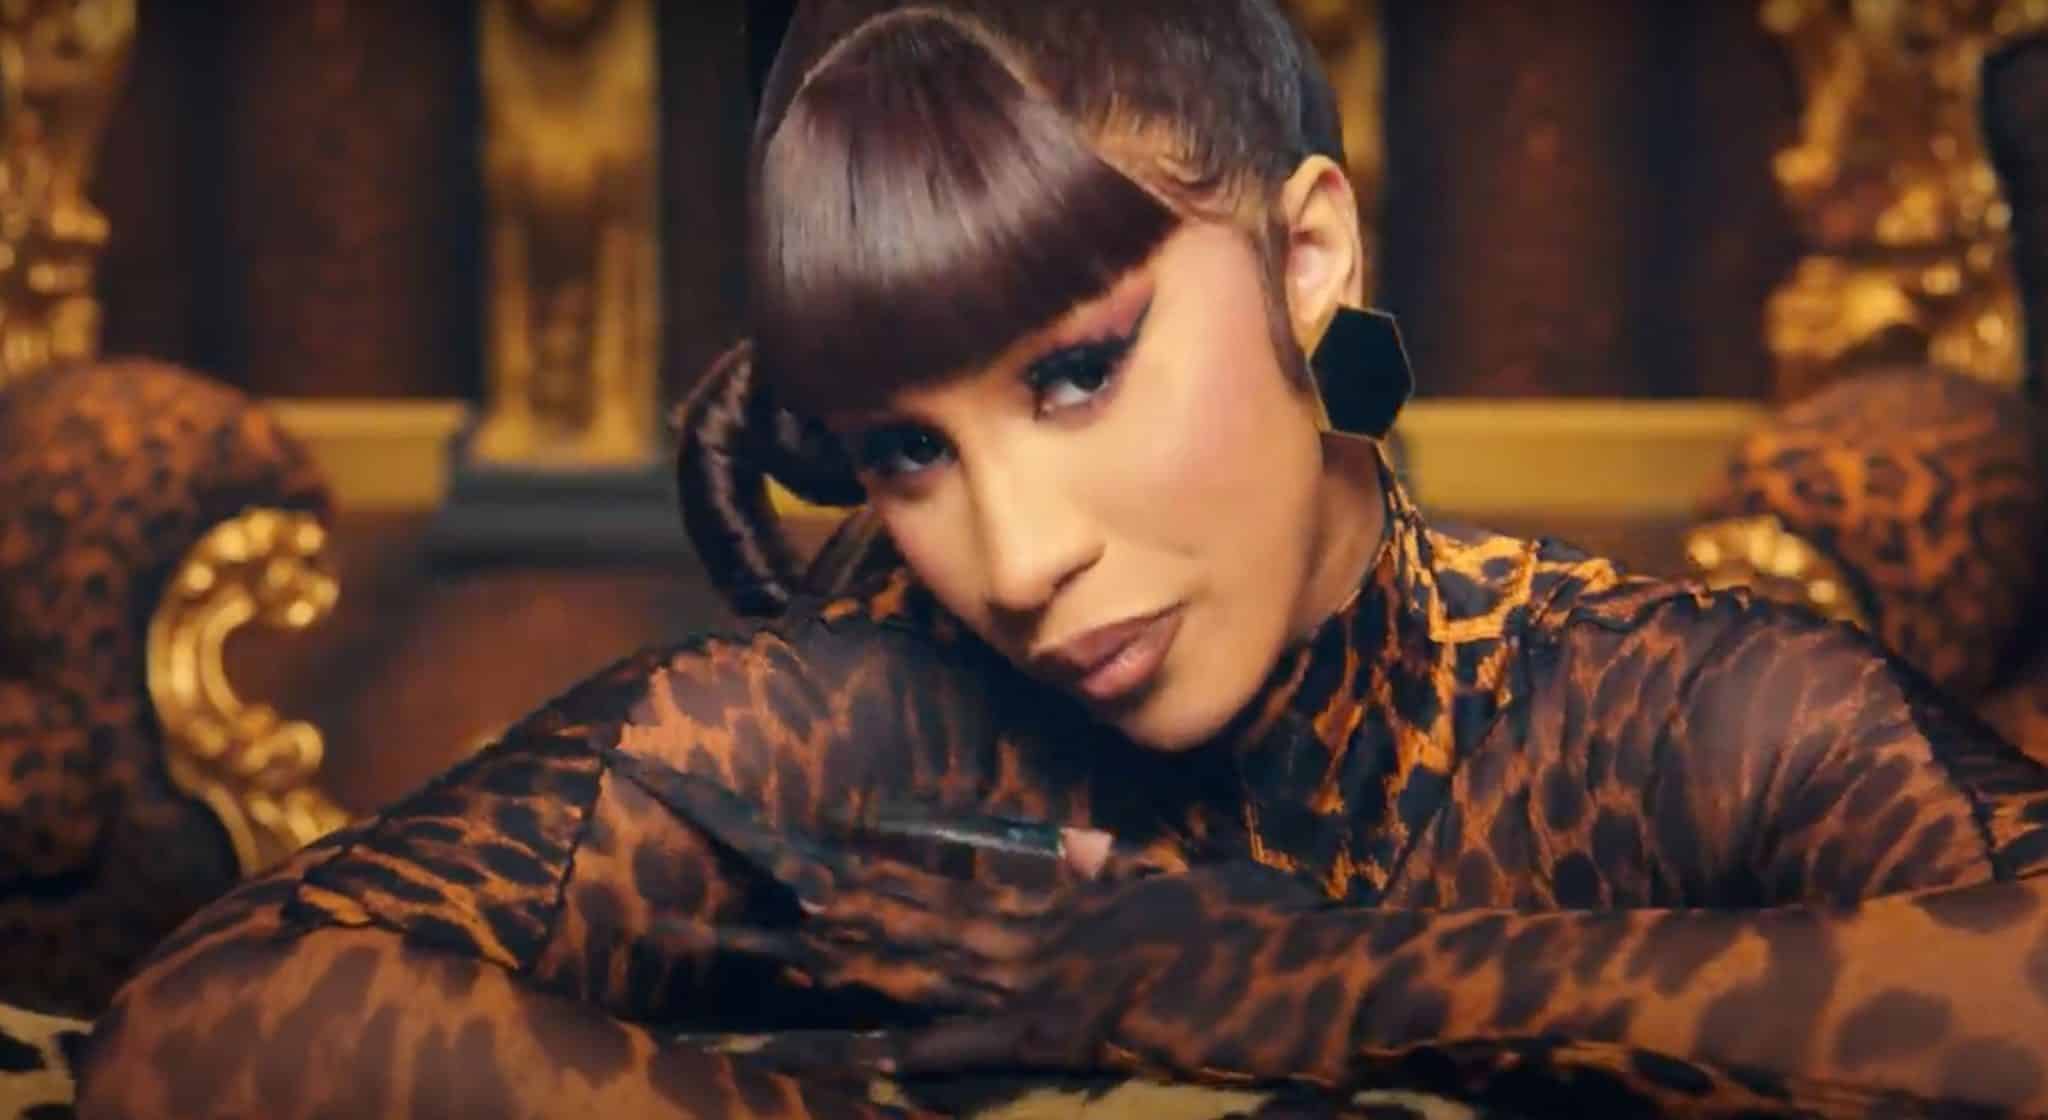 Cardi B in the music video for her song 'WAP'